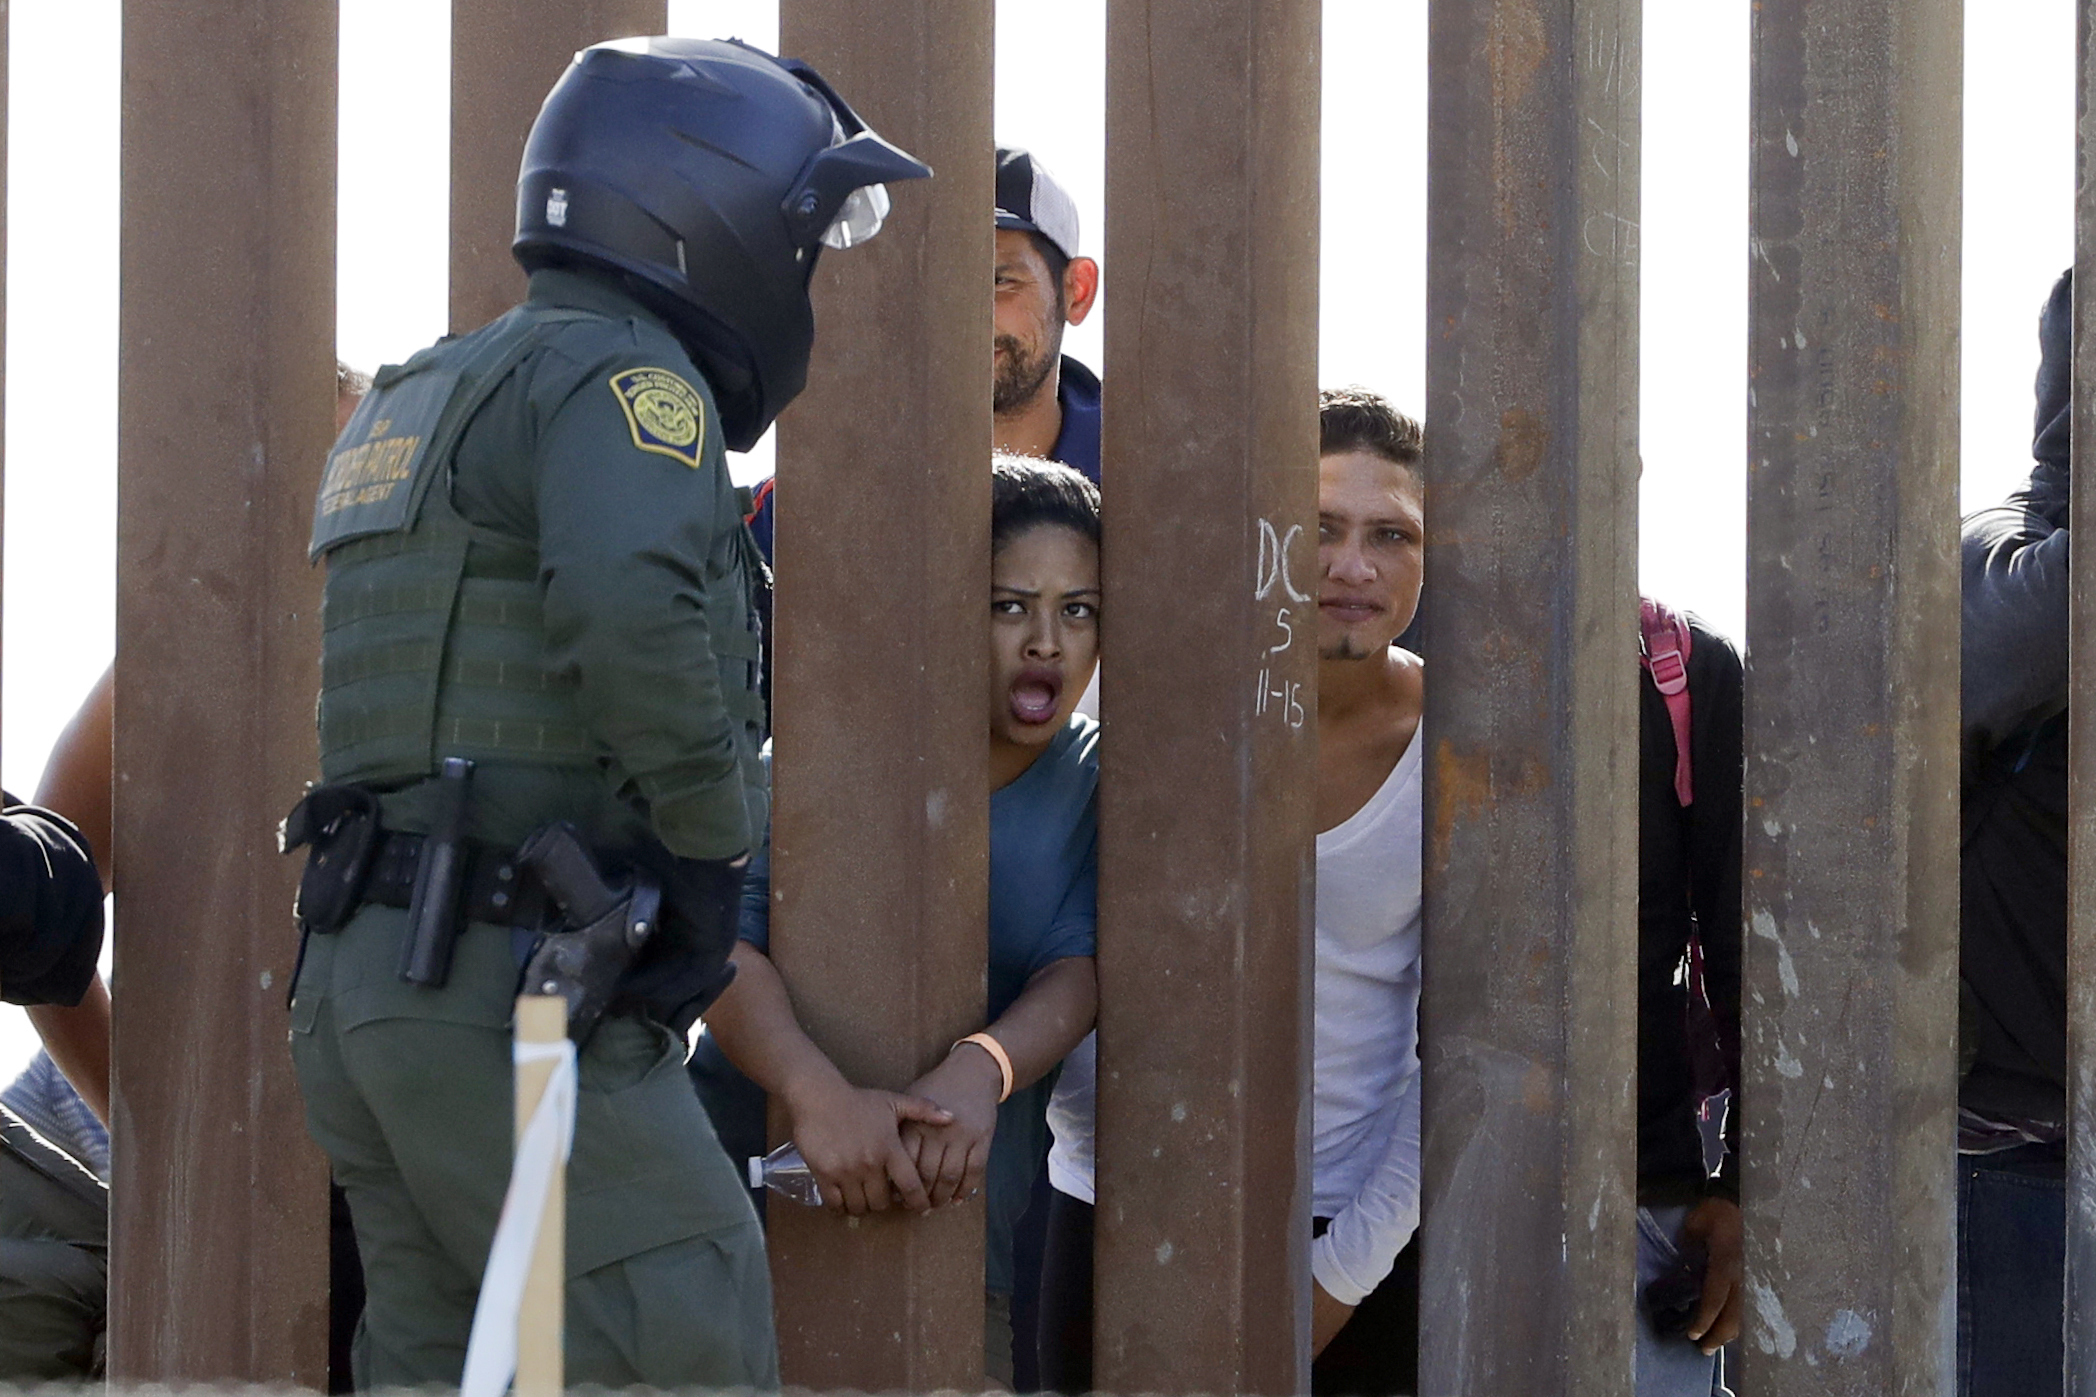 Migrants from Central America yell through a border wall at a U.S. Border Patrol agent after he pulled down a banner Sunday, Nov. 25, 2018, in San Diego. Migrants approaching the U.S. border from Mexico were enveloped with tear gas Sunday after a few